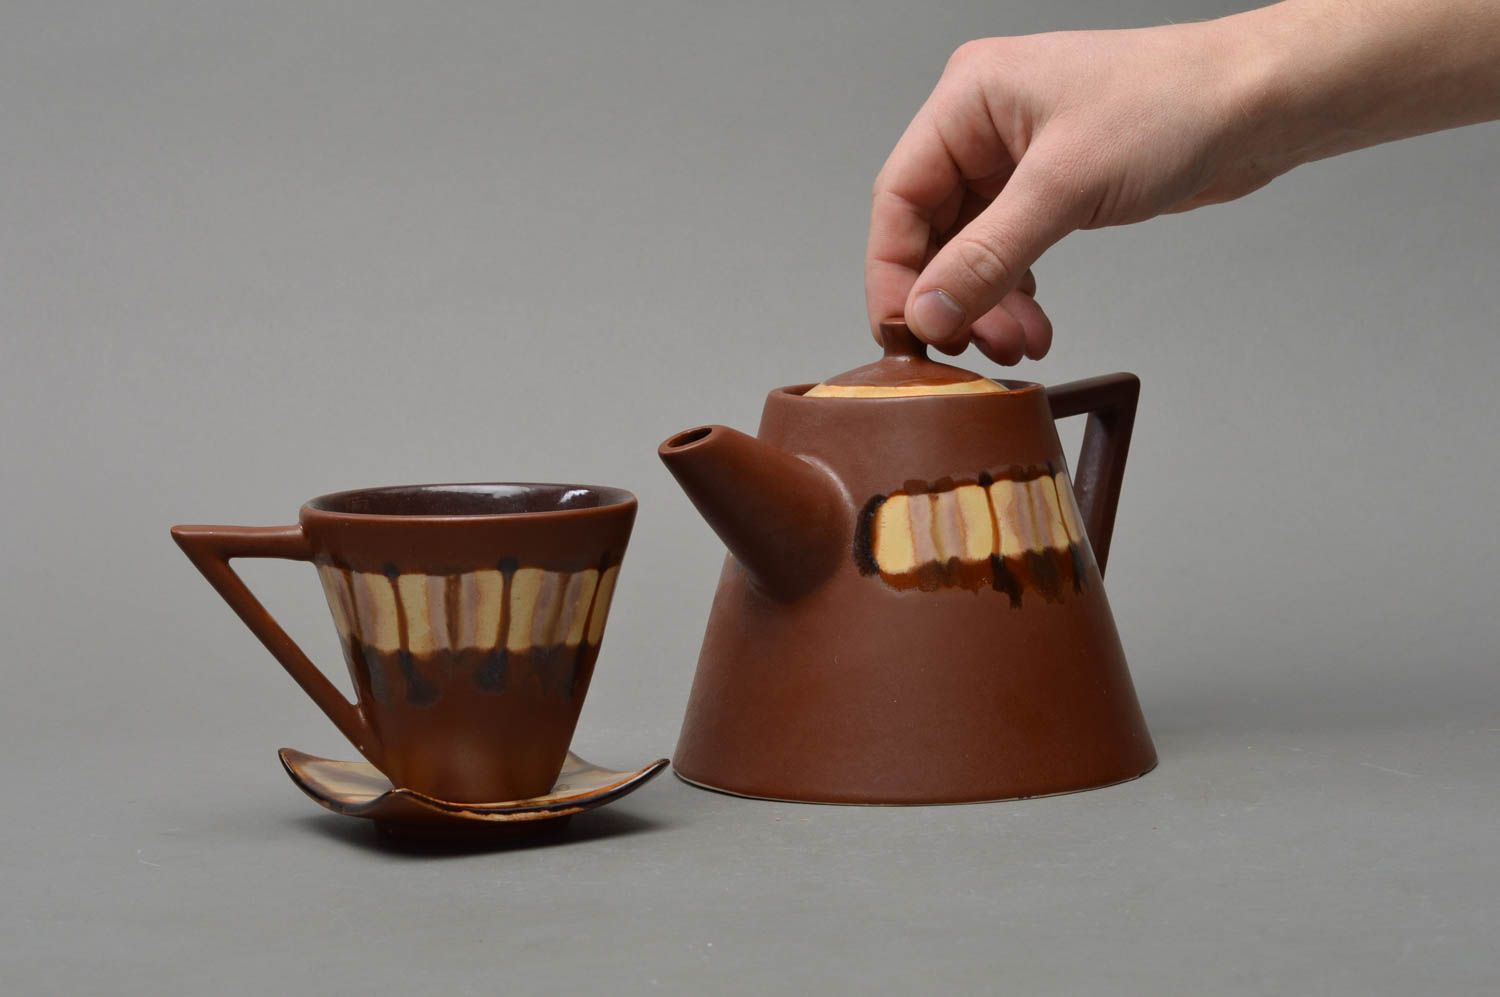 Art handmade pottery set of pyramid shape kettle and teacup in brown and beige color photo 4